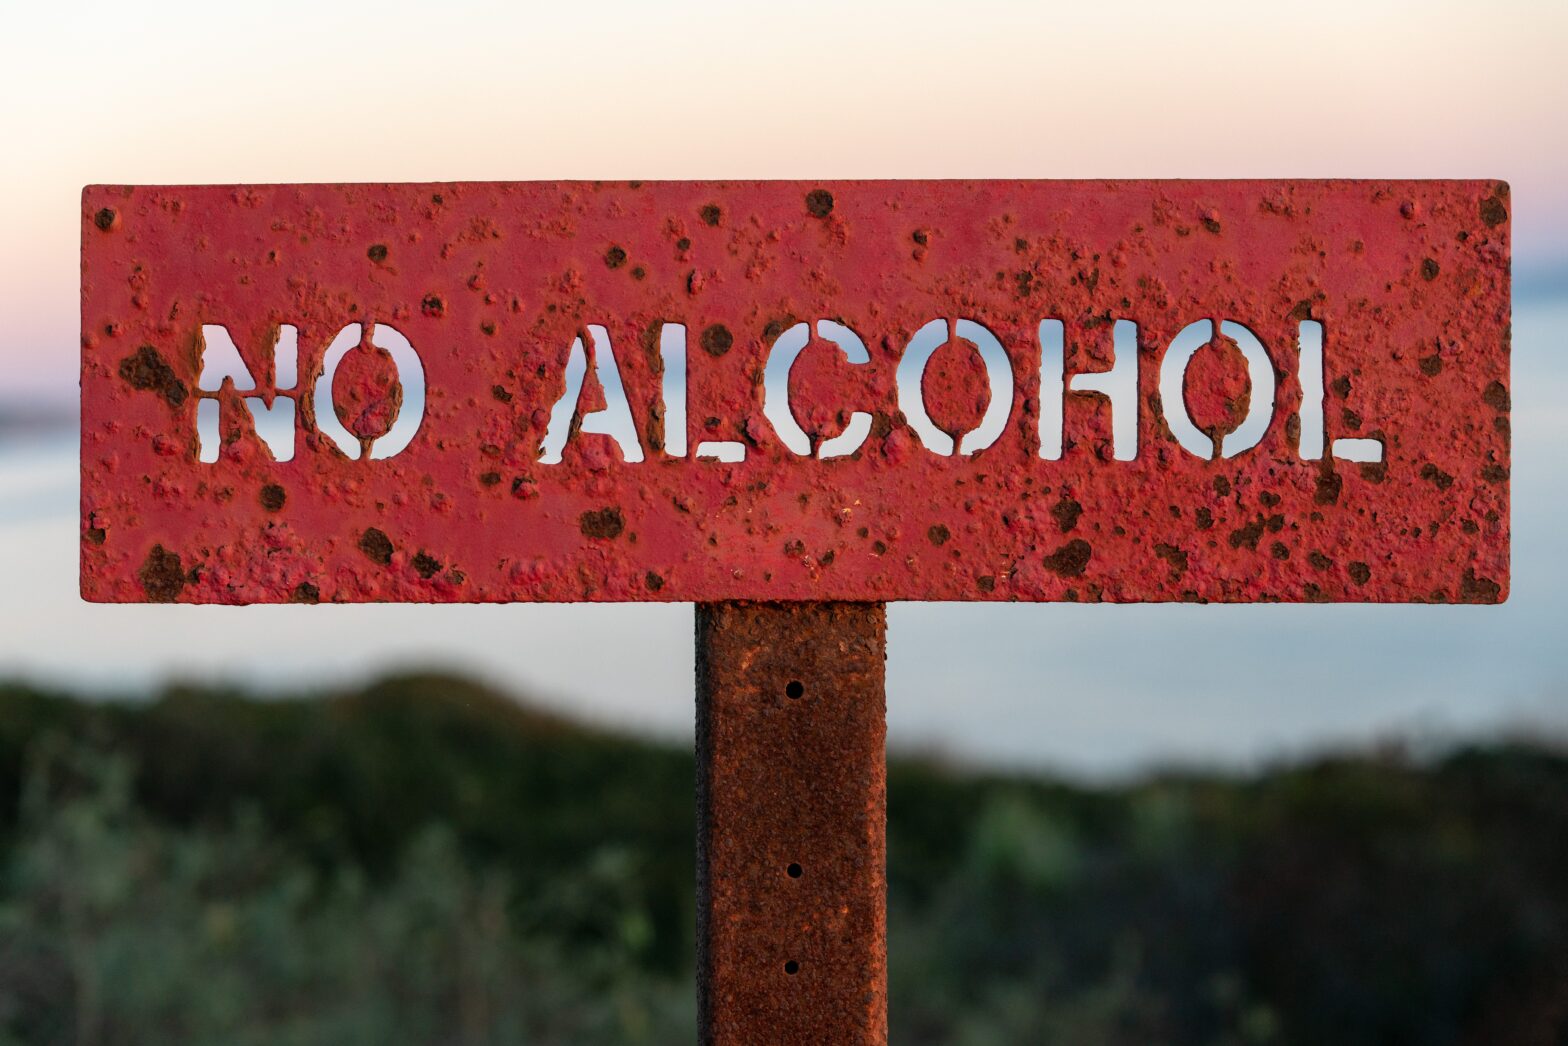 Enjoy An Amazing Sober Vacation with These Tips